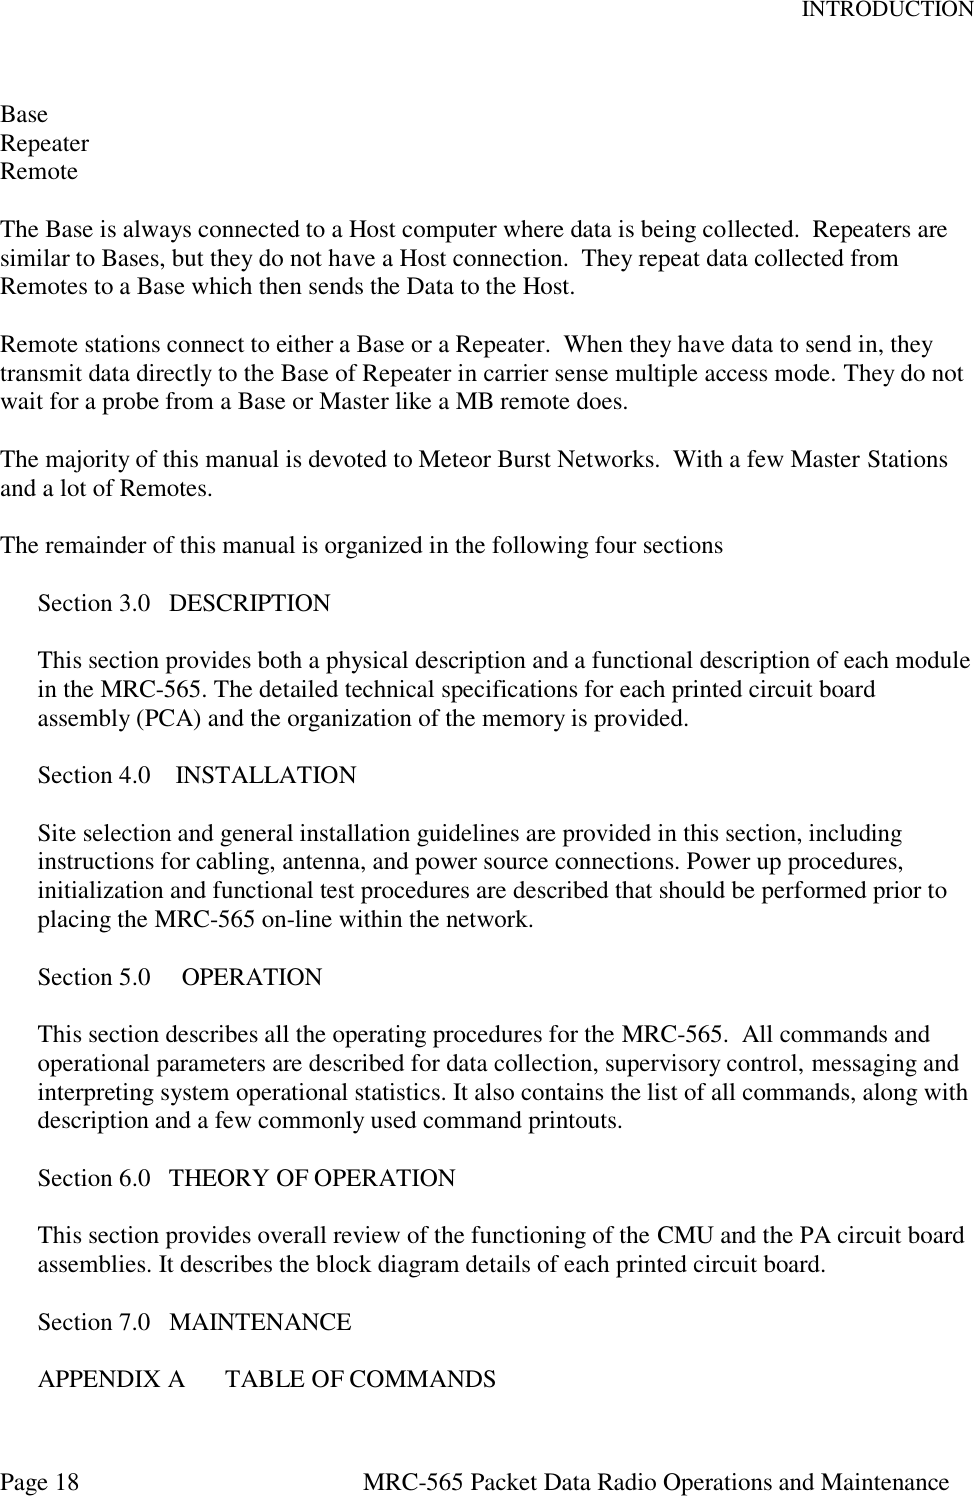 INTRODUCTION Page 18  MRC-565 Packet Data Radio Operations and Maintenance  Base Repeater Remote  The Base is always connected to a Host computer where data is being collected.  Repeaters are similar to Bases, but they do not have a Host connection.  They repeat data collected from Remotes to a Base which then sends the Data to the Host.  Remote stations connect to either a Base or a Repeater.  When they have data to send in, they transmit data directly to the Base of Repeater in carrier sense multiple access mode. They do not wait for a probe from a Base or Master like a MB remote does.  The majority of this manual is devoted to Meteor Burst Networks.  With a few Master Stations and a lot of Remotes.  The remainder of this manual is organized in the following four sections  Section 3.0   DESCRIPTION  This section provides both a physical description and a functional description of each module in the MRC-565. The detailed technical specifications for each printed circuit board assembly (PCA) and the organization of the memory is provided.  Section 4.0    INSTALLATION  Site selection and general installation guidelines are provided in this section, including instructions for cabling, antenna, and power source connections. Power up procedures, initialization and functional test procedures are described that should be performed prior to placing the MRC-565 on-line within the network.  Section 5.0     OPERATION  This section describes all the operating procedures for the MRC-565.  All commands and operational parameters are described for data collection, supervisory control, messaging and interpreting system operational statistics. It also contains the list of all commands, along with description and a few commonly used command printouts.  Section 6.0   THEORY OF OPERATION  This section provides overall review of the functioning of the CMU and the PA circuit board assemblies. It describes the block diagram details of each printed circuit board.  Section 7.0   MAINTENANCE  APPENDIX A  TABLE OF COMMANDS 